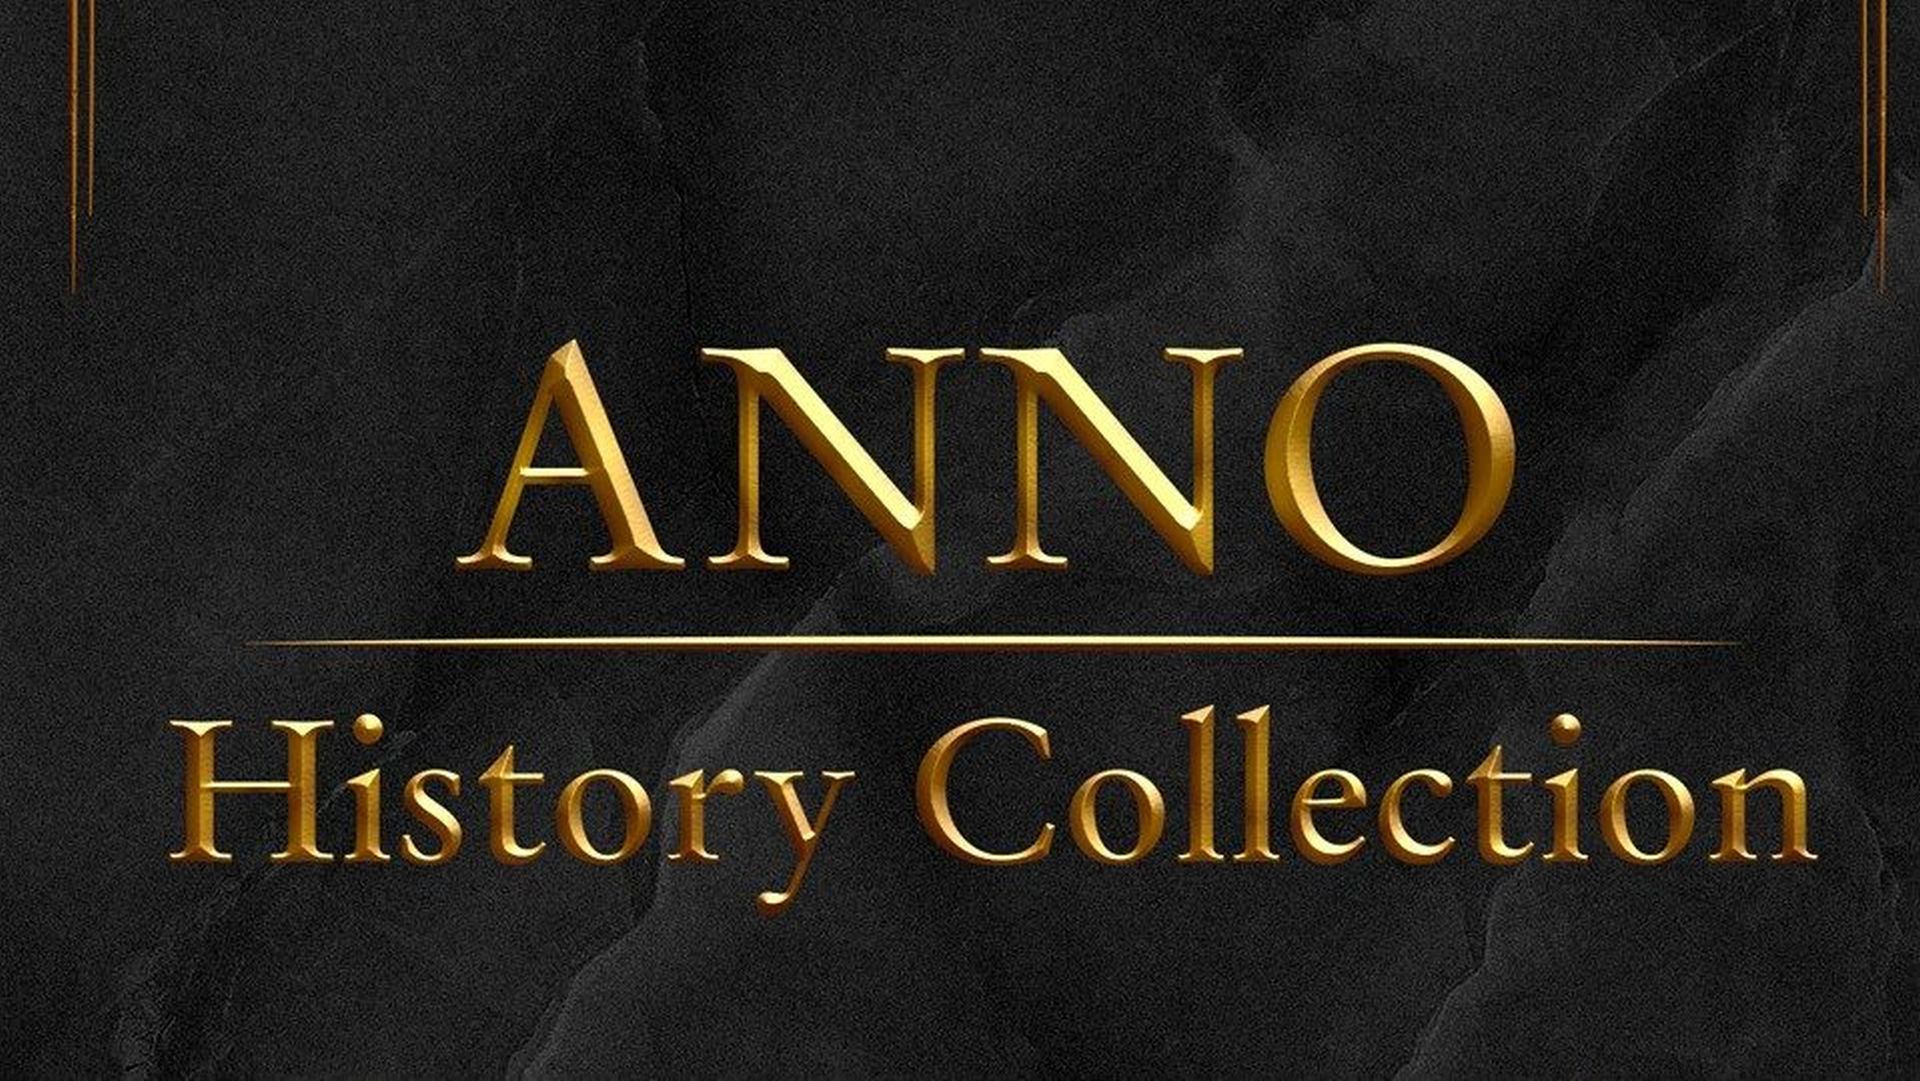 Anno History Collection Announced, Contains 4K Titles Support 4 With Classic